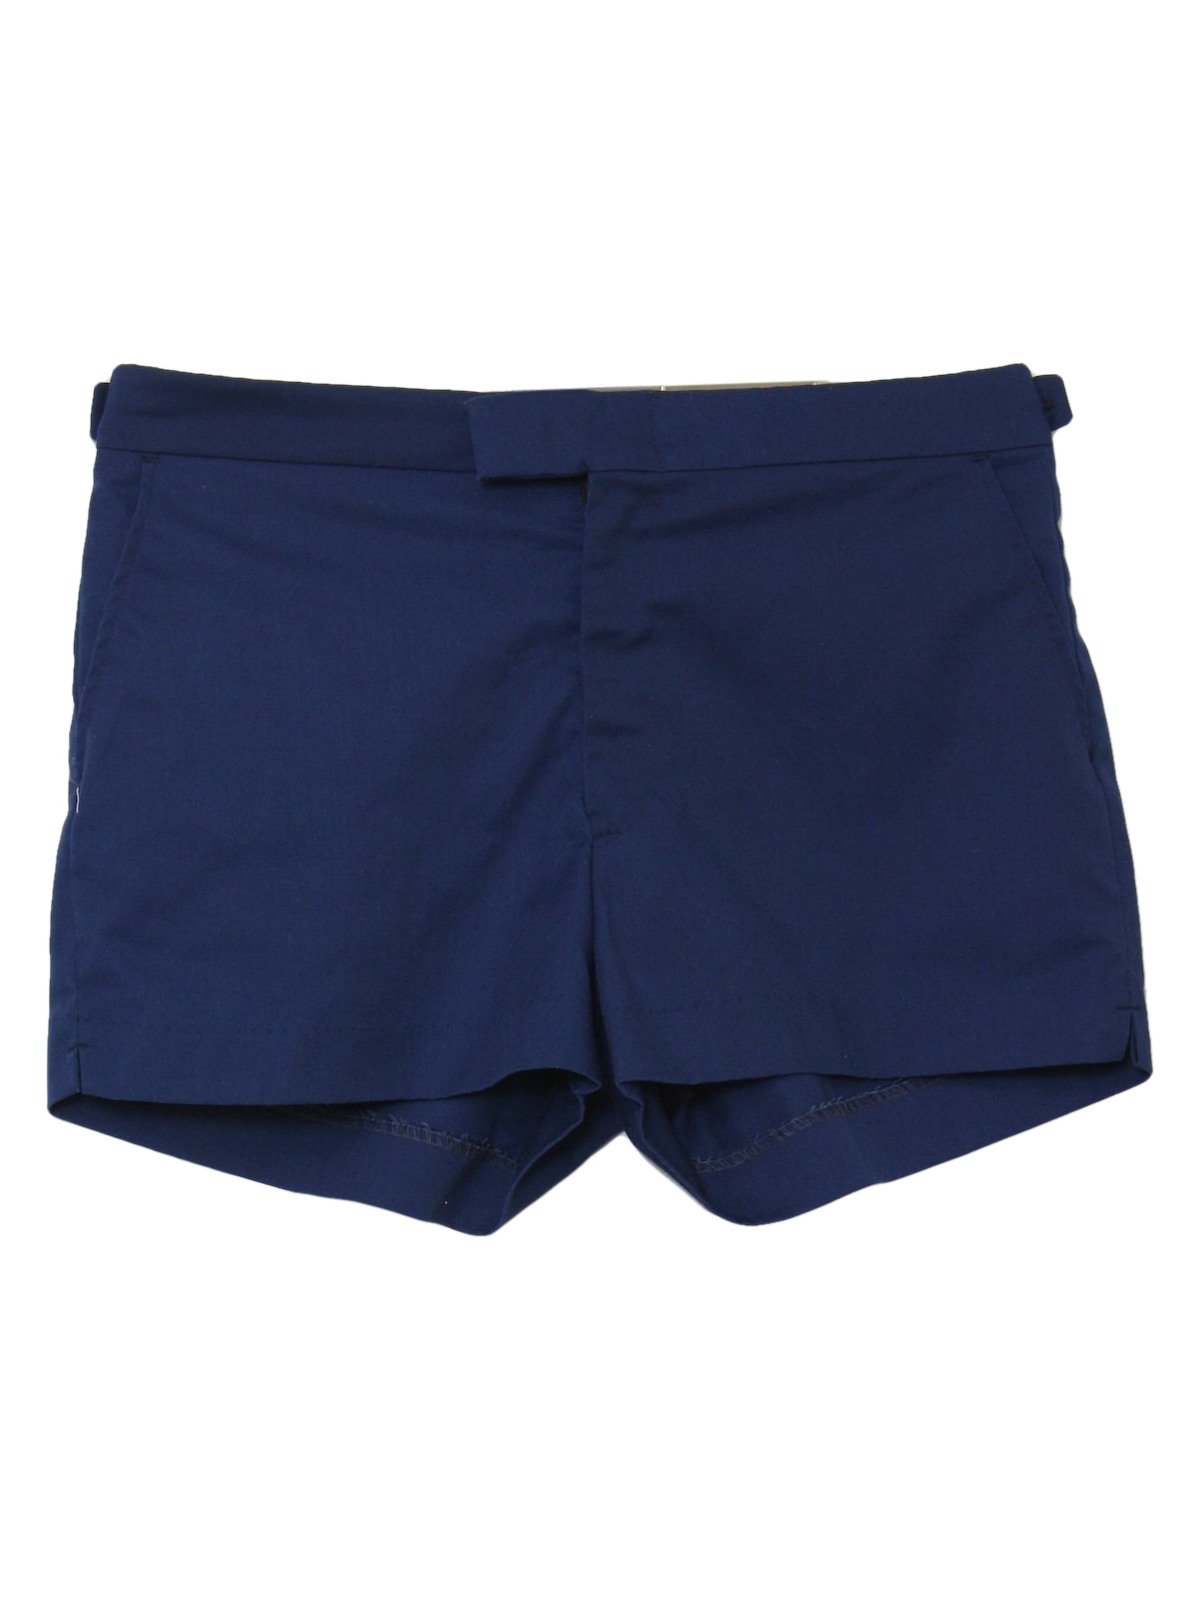 Seventies Care Label Shorts: 70s -Care Label- Mens midnight blue ...